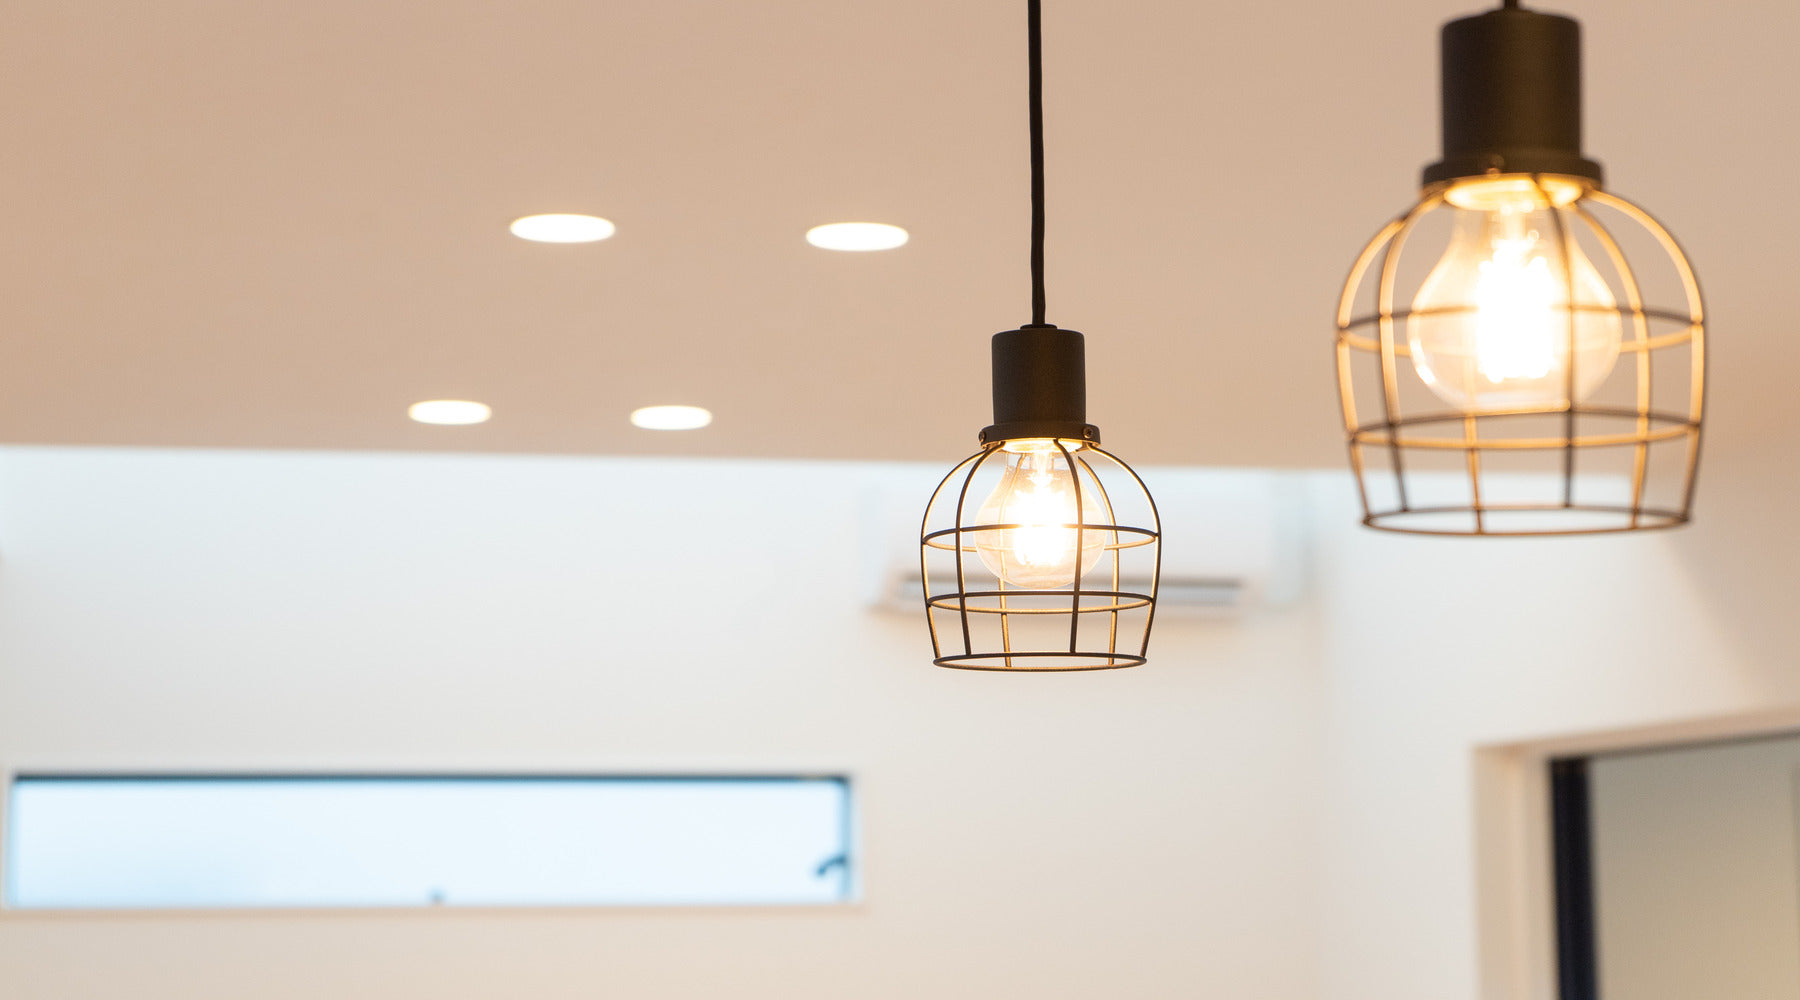 BR30 LED bulbs shown in recessed cans in living area with pendant lights